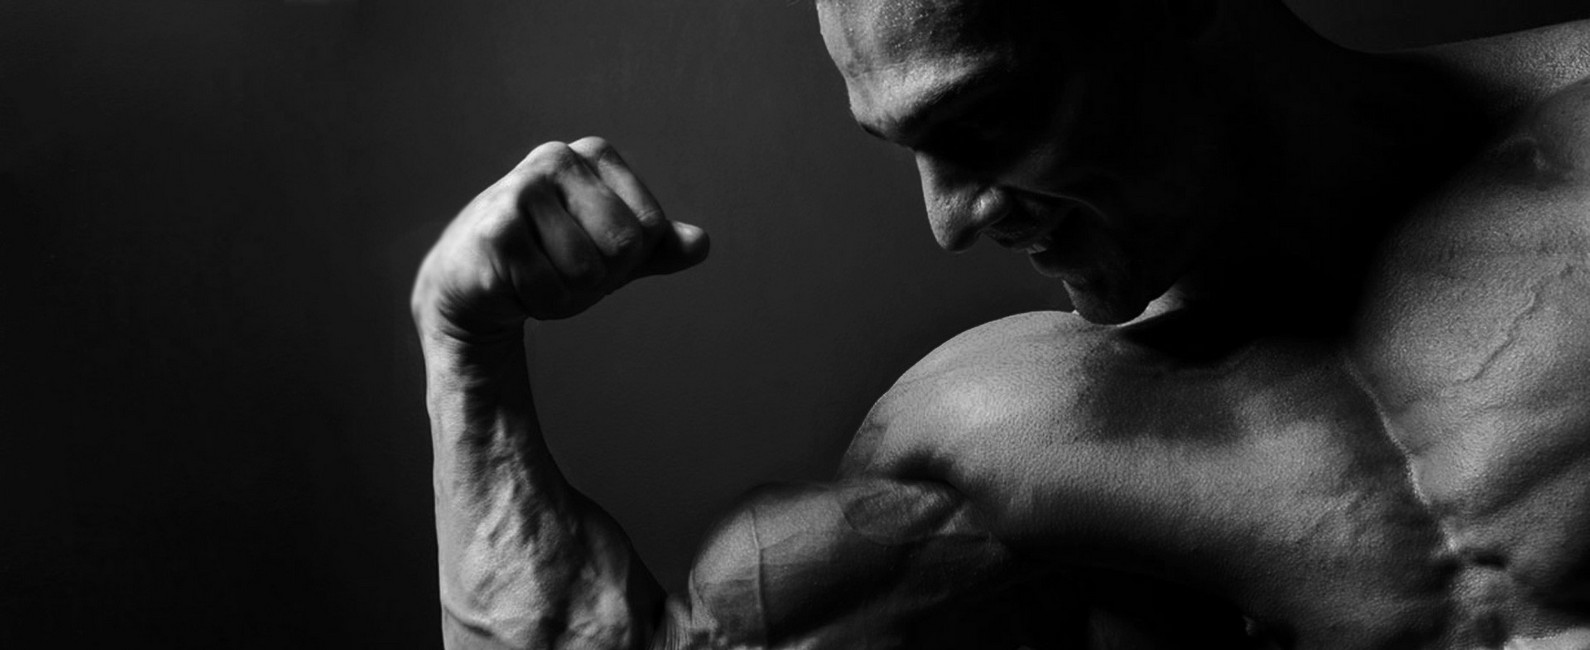 Are anabolic steroids used for medical purposes